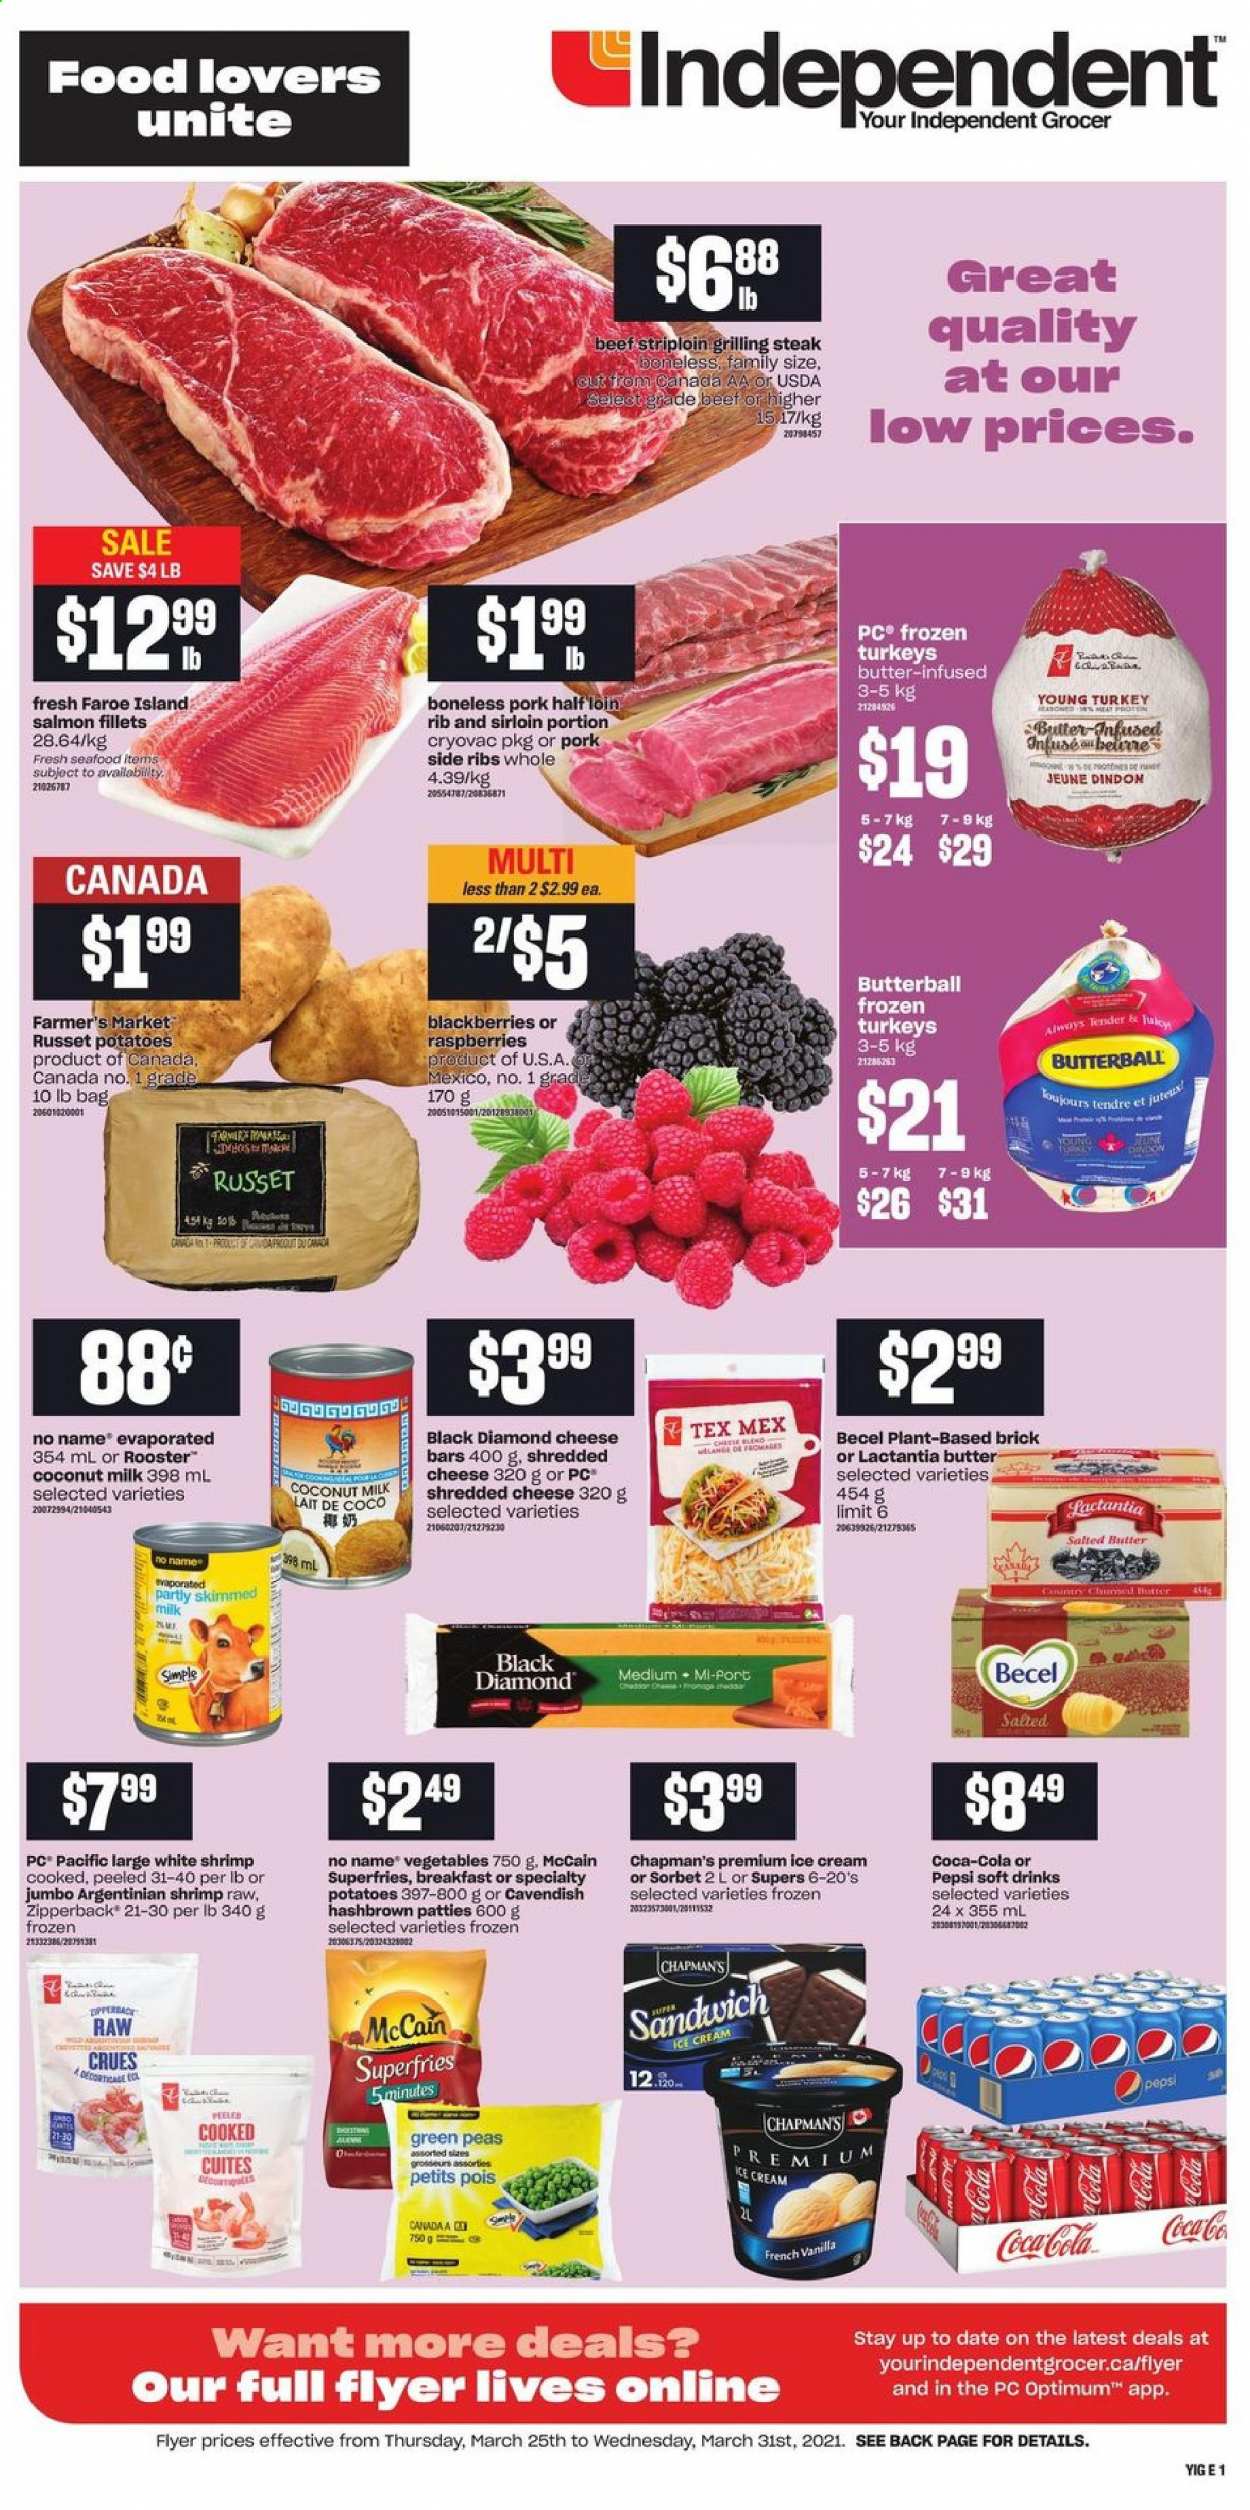 thumbnail - Independent Flyer - March 25, 2021 - March 31, 2021 - Sales products - russet potatoes, potatoes, peas, blackberries, salmon, salmon fillet, seafood, shrimps, No Name, Butterball, shredded cheese, ice cream, McCain, potato fries, coconut milk, Coca-Cola, Pepsi, soft drink, Optimum, steak. Page 1.